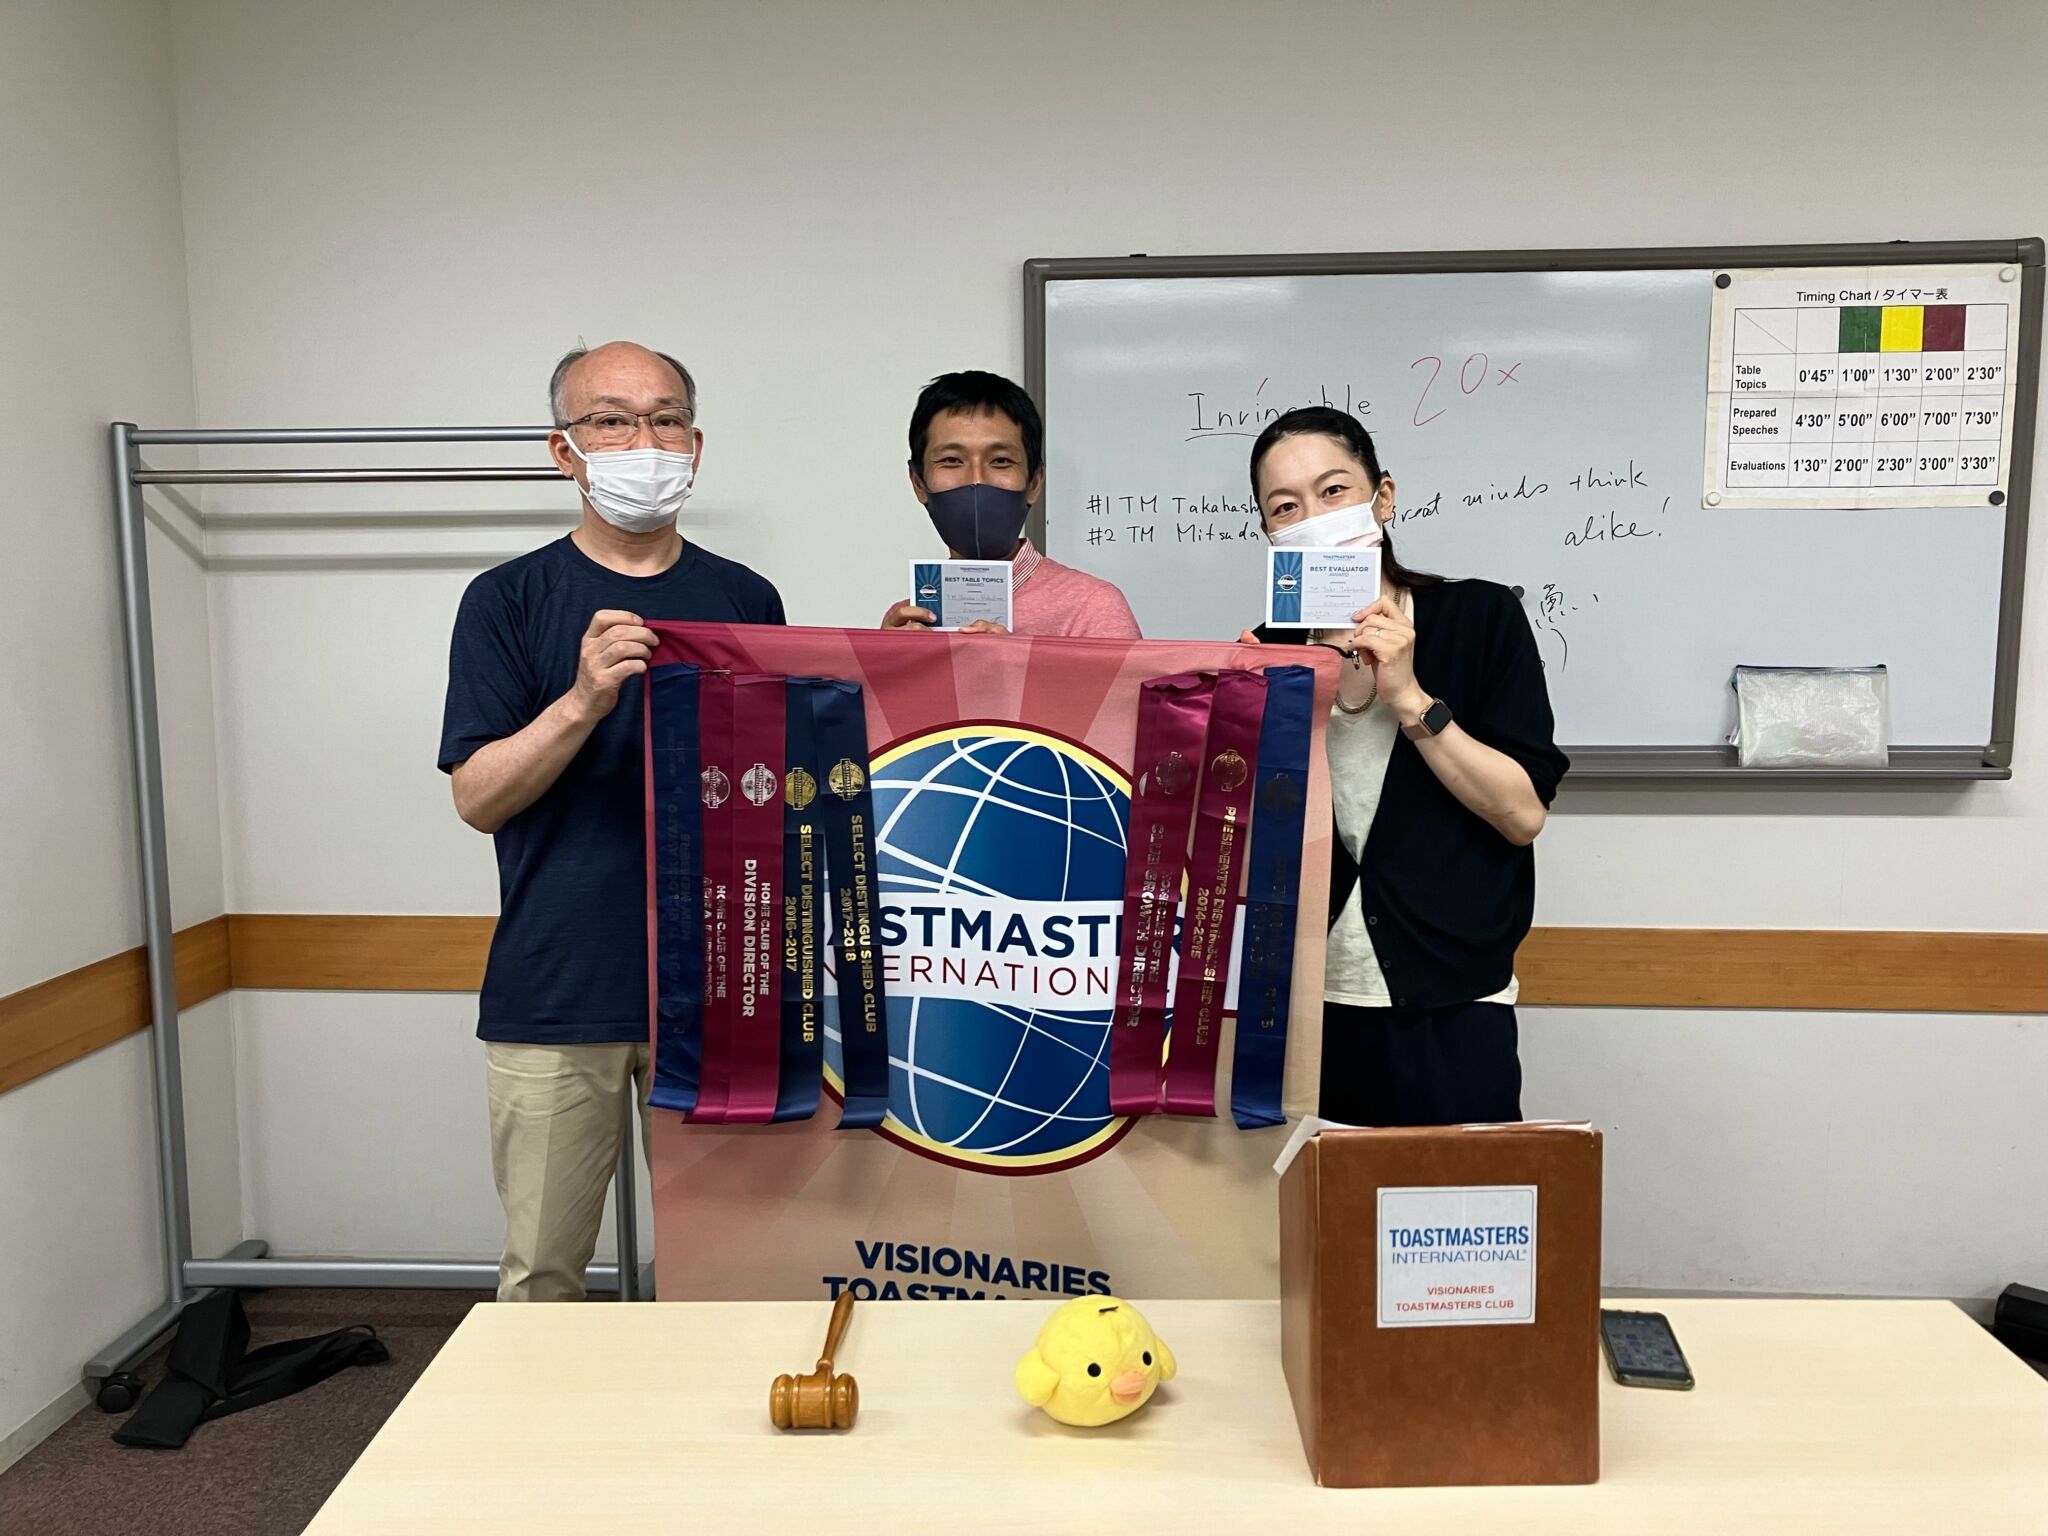 Toastmasters 英語スピーチ